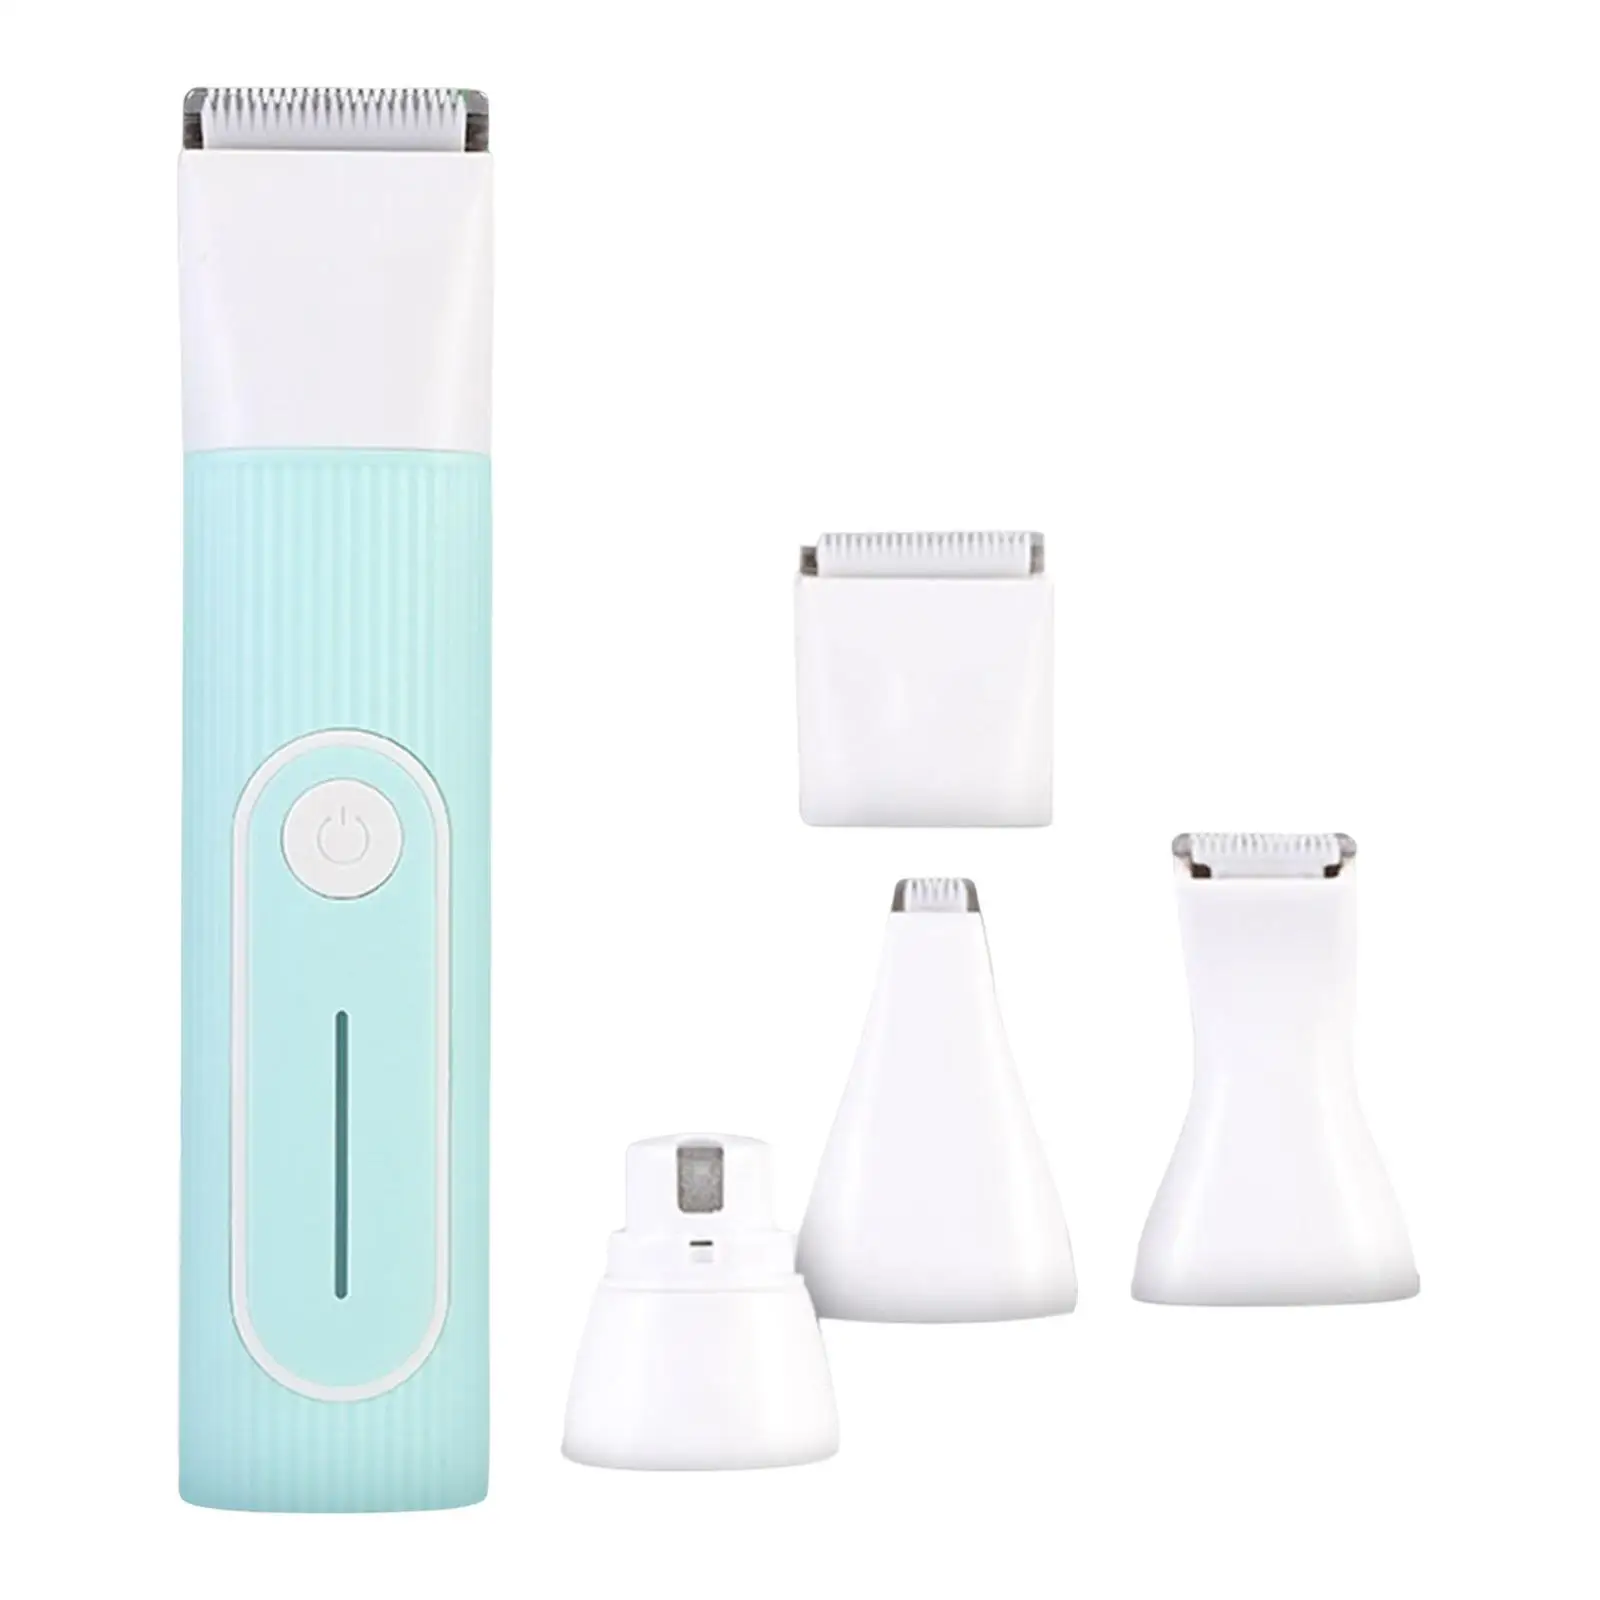 Dog Hair Clippers Pet Grooming Kit Low Noise Detachable Grooming Tool Rechargeable with Blades for Small Medium Large Dogs Cats